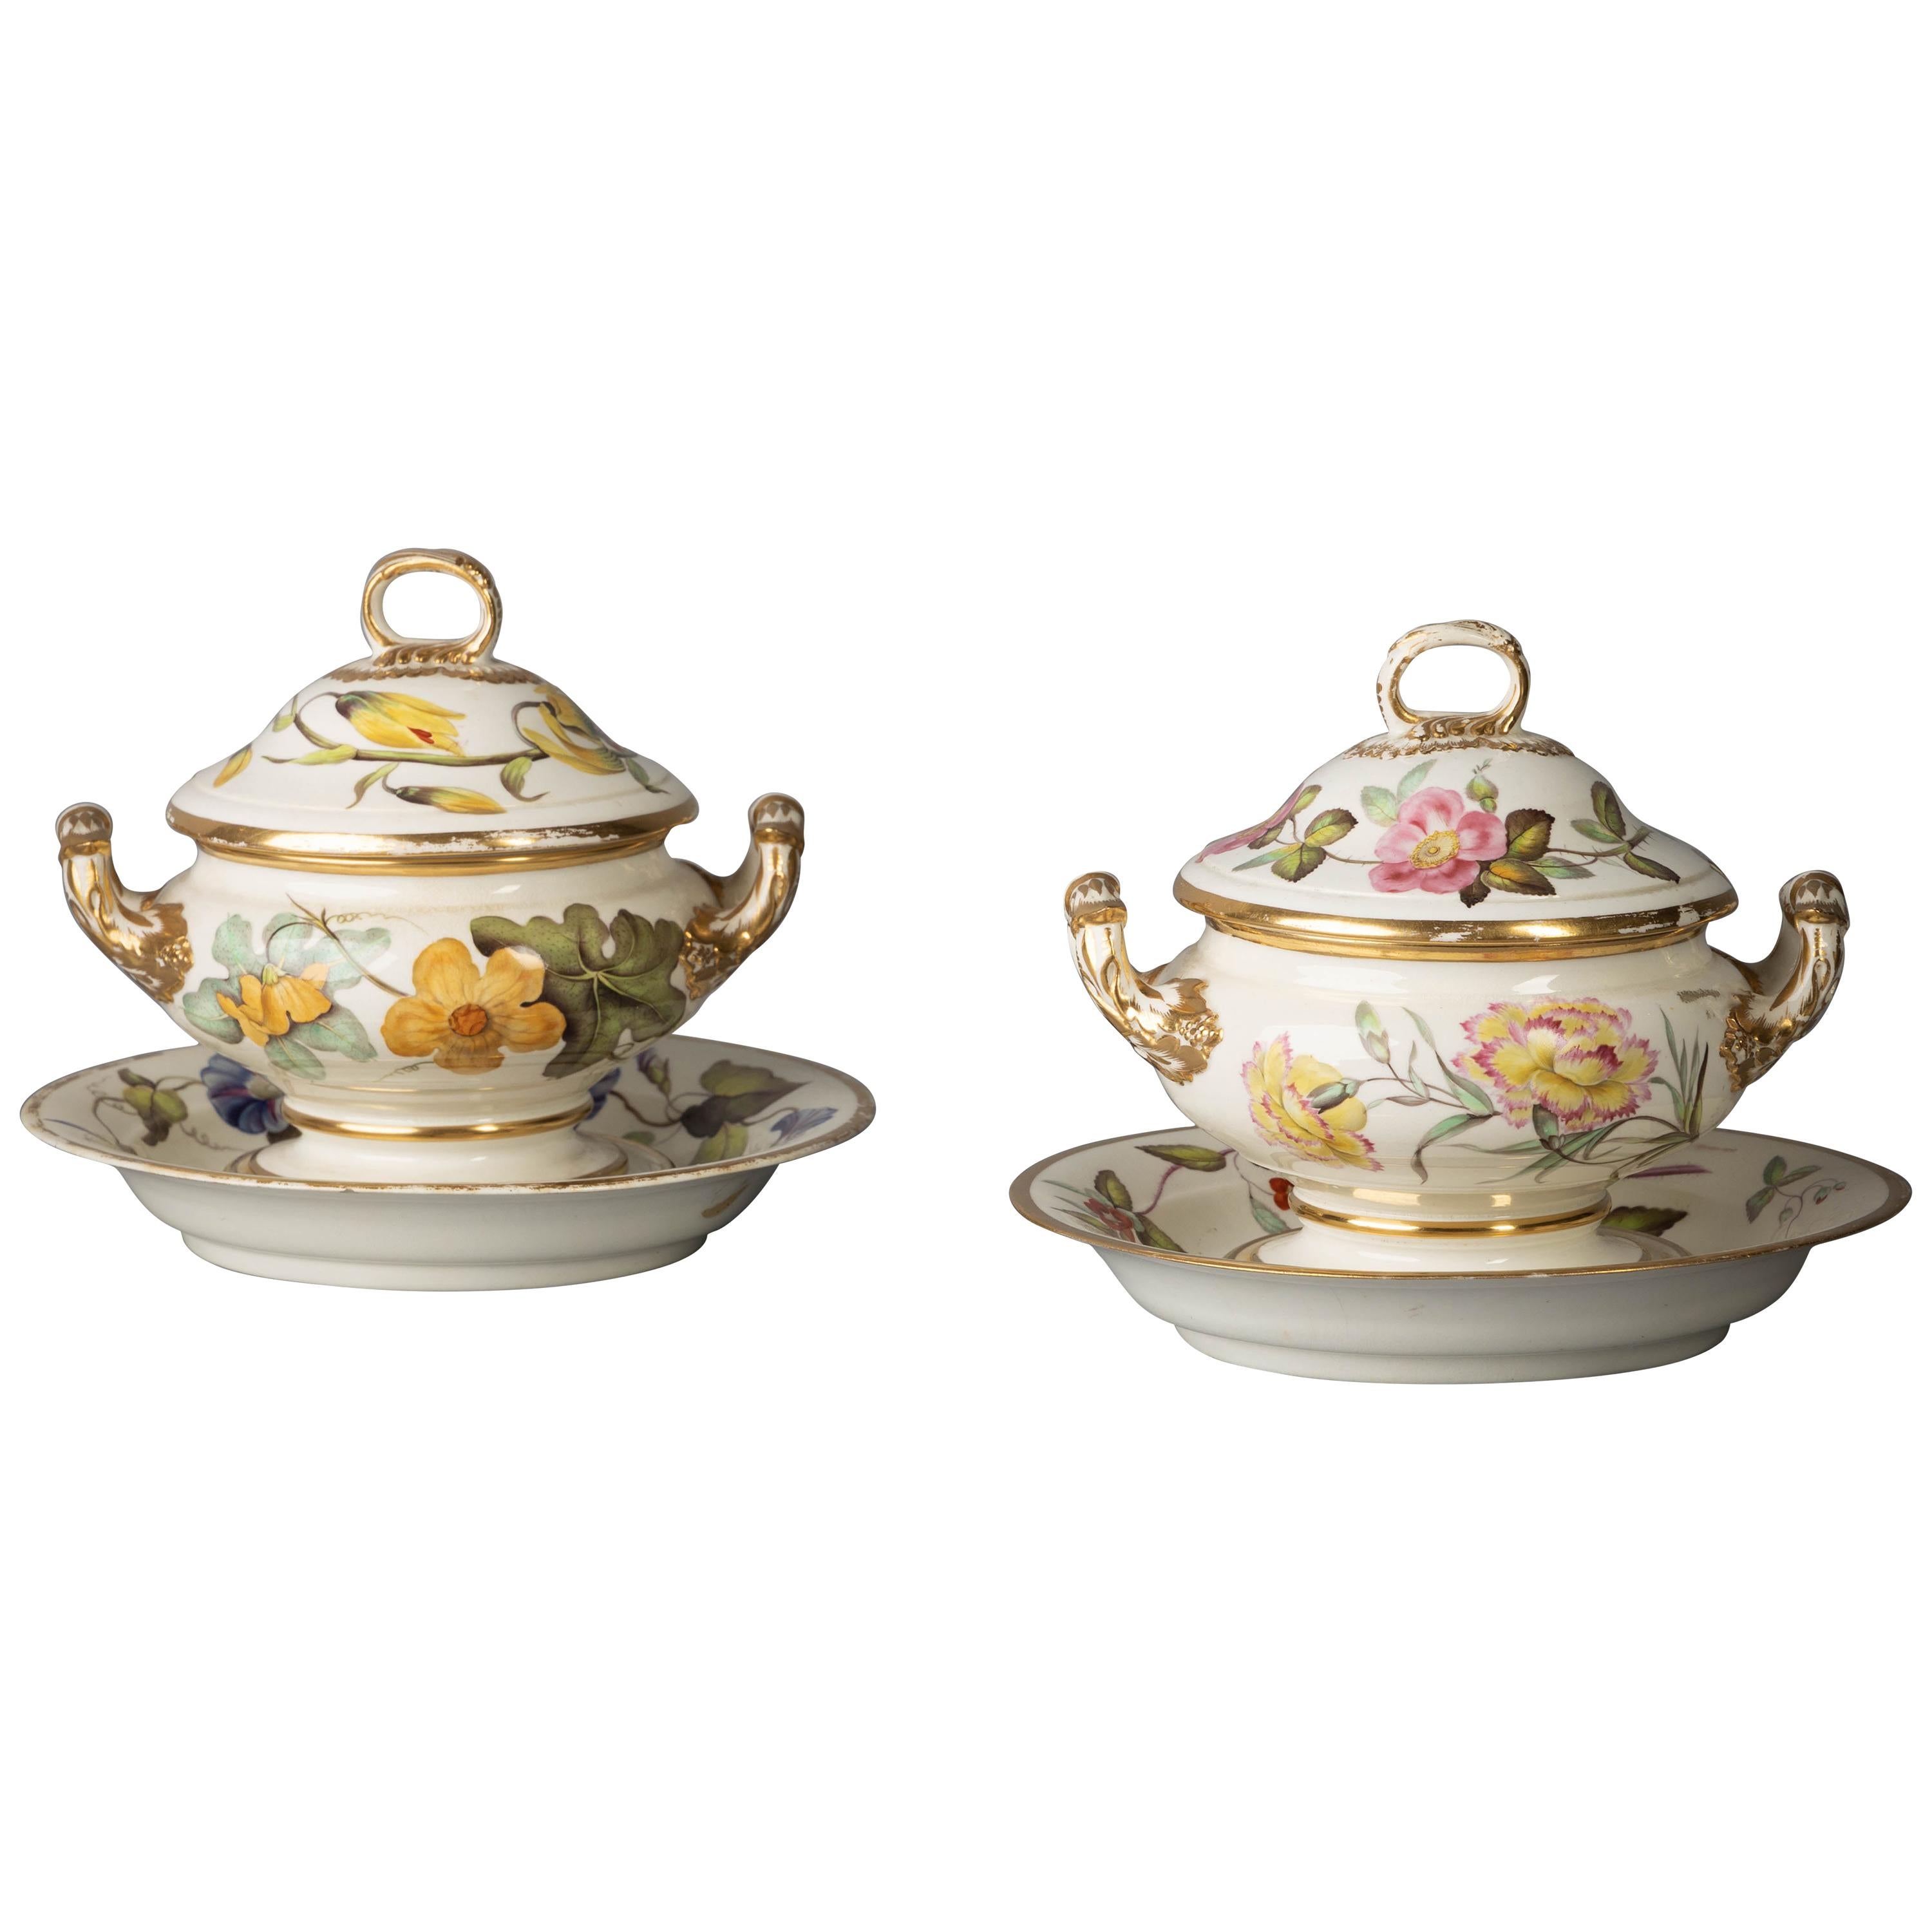 Pair of English Porcelain Botanical Sauce Tureens on Stands, Derby, circa 1820 For Sale